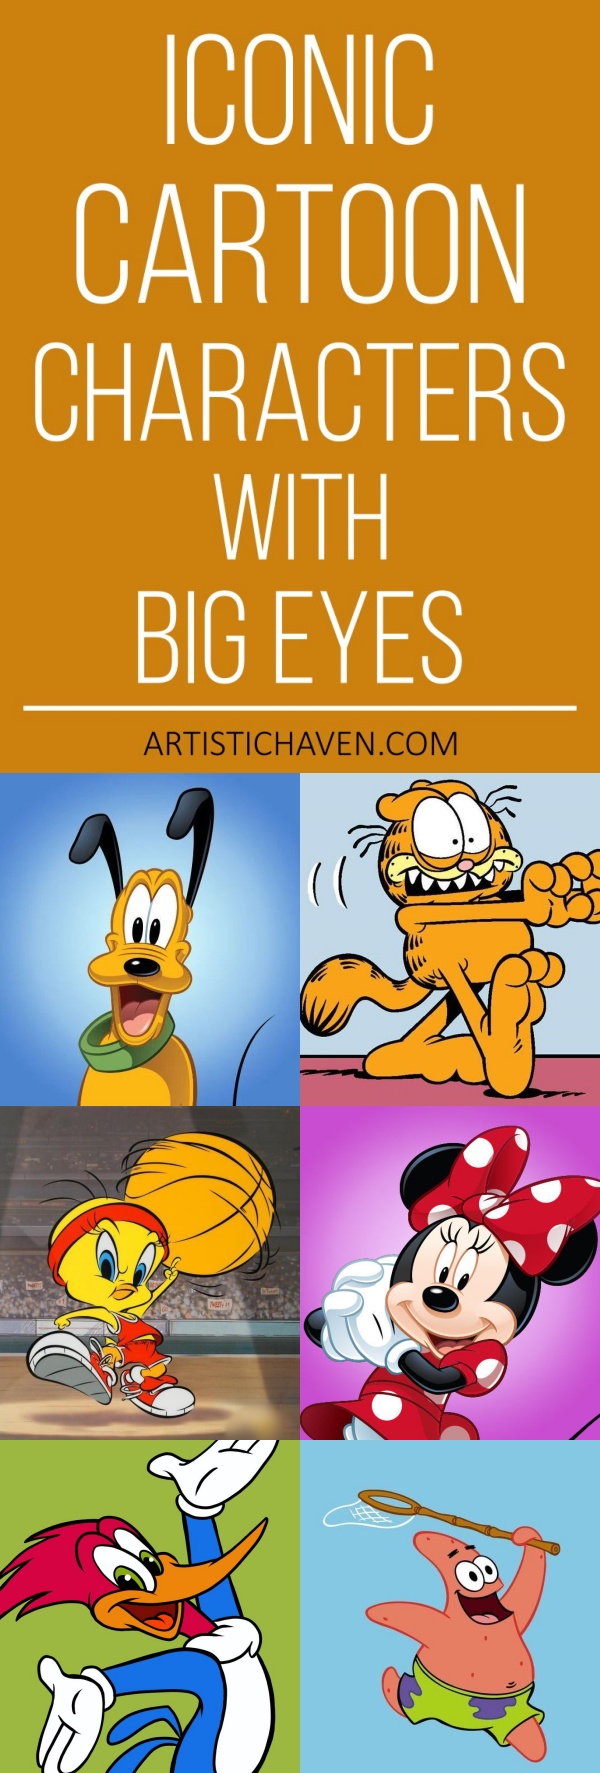 Iconic Cartoon Characters With Big Eyes